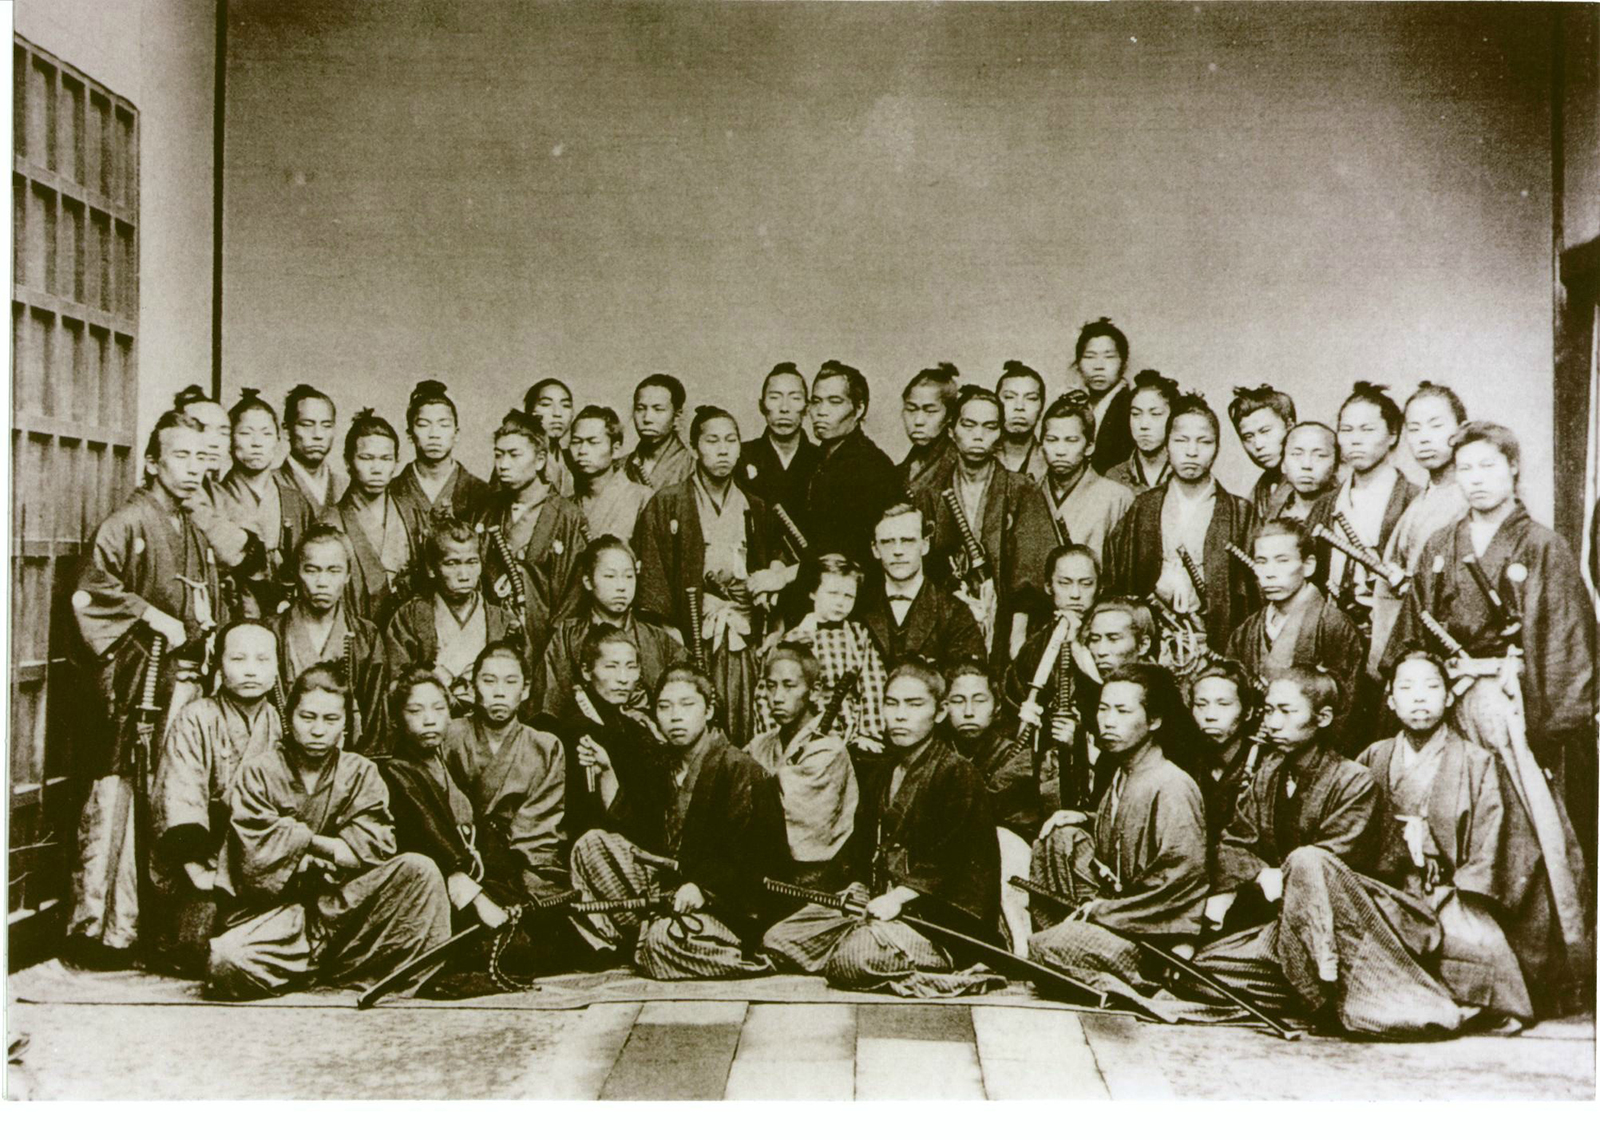 Dutchman Guido Verbeck surrounded by samurai in the year 1868